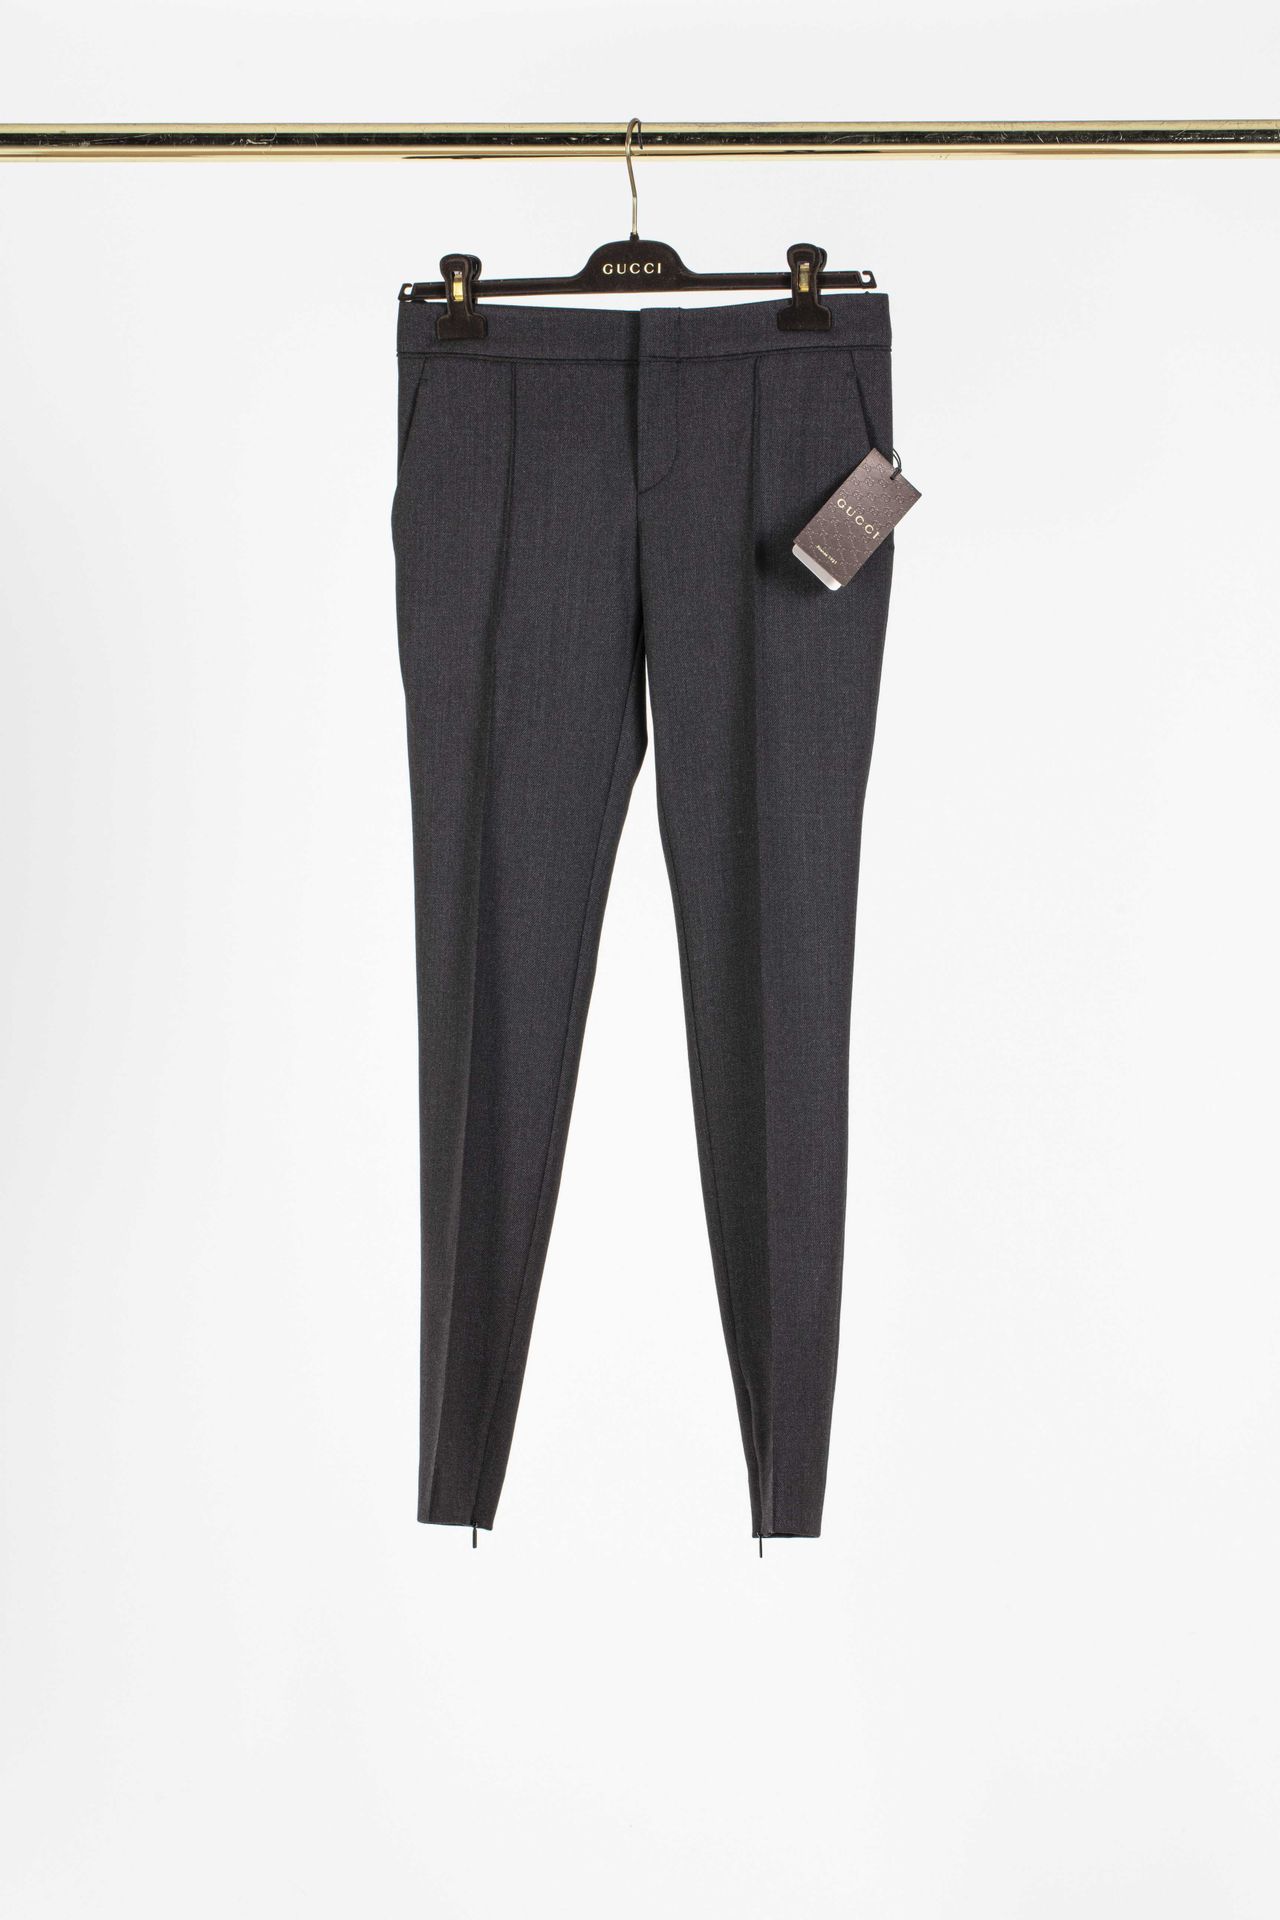 Null GUCCI: trouser suit in grey polyester including straight trousers and a jac&hellip;